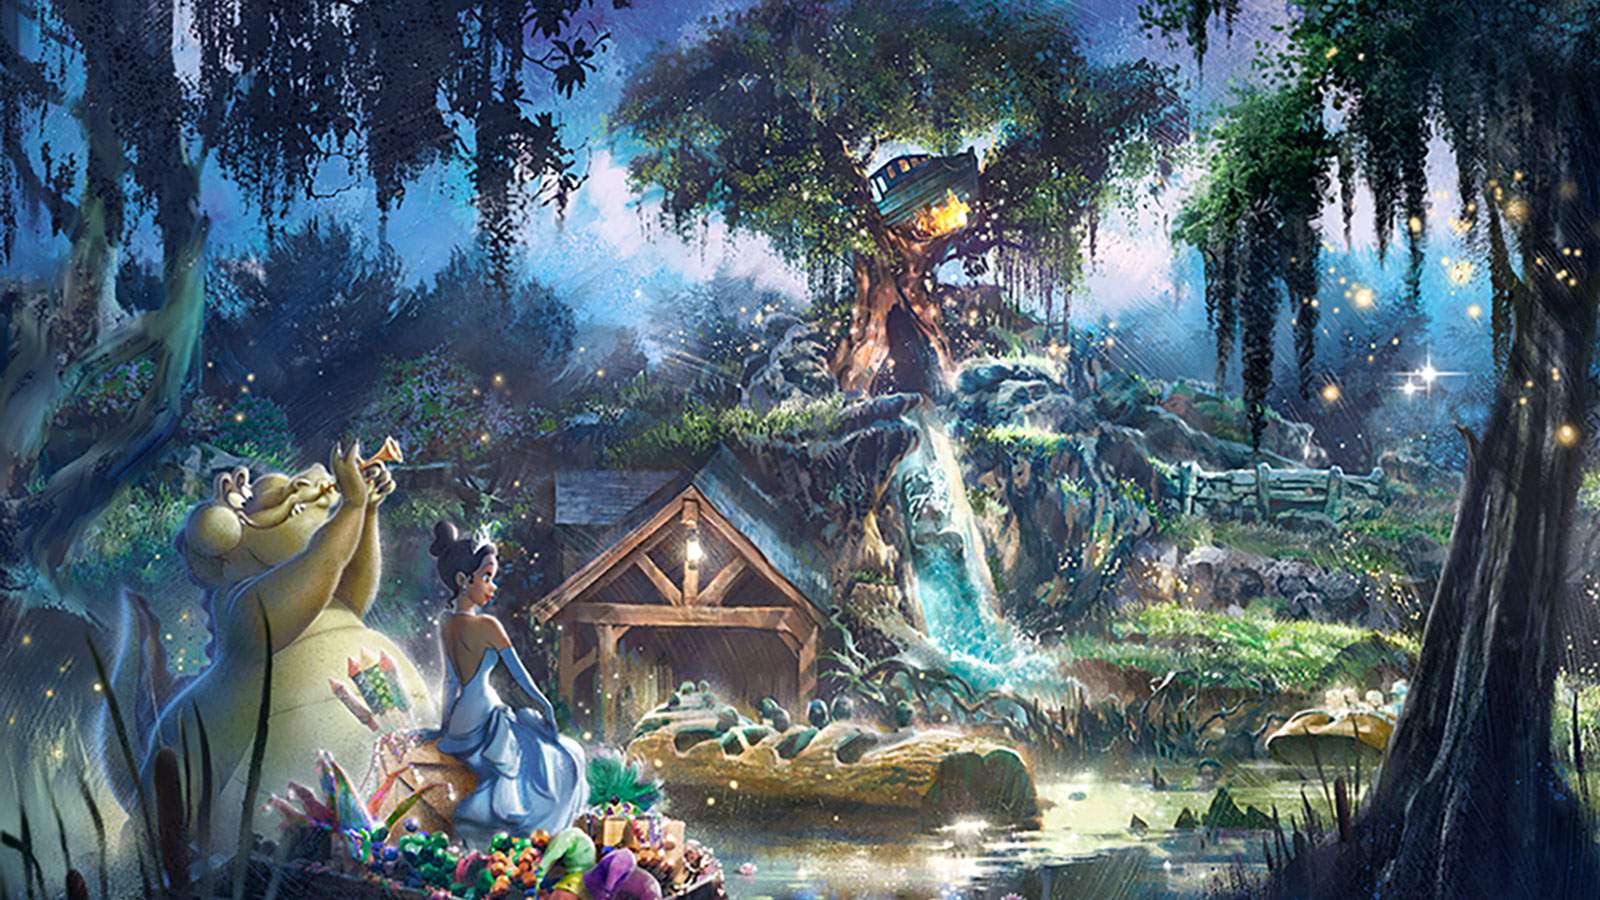 Splash Mountain, a Disney ride based on a controversial film, will be completely reimagined